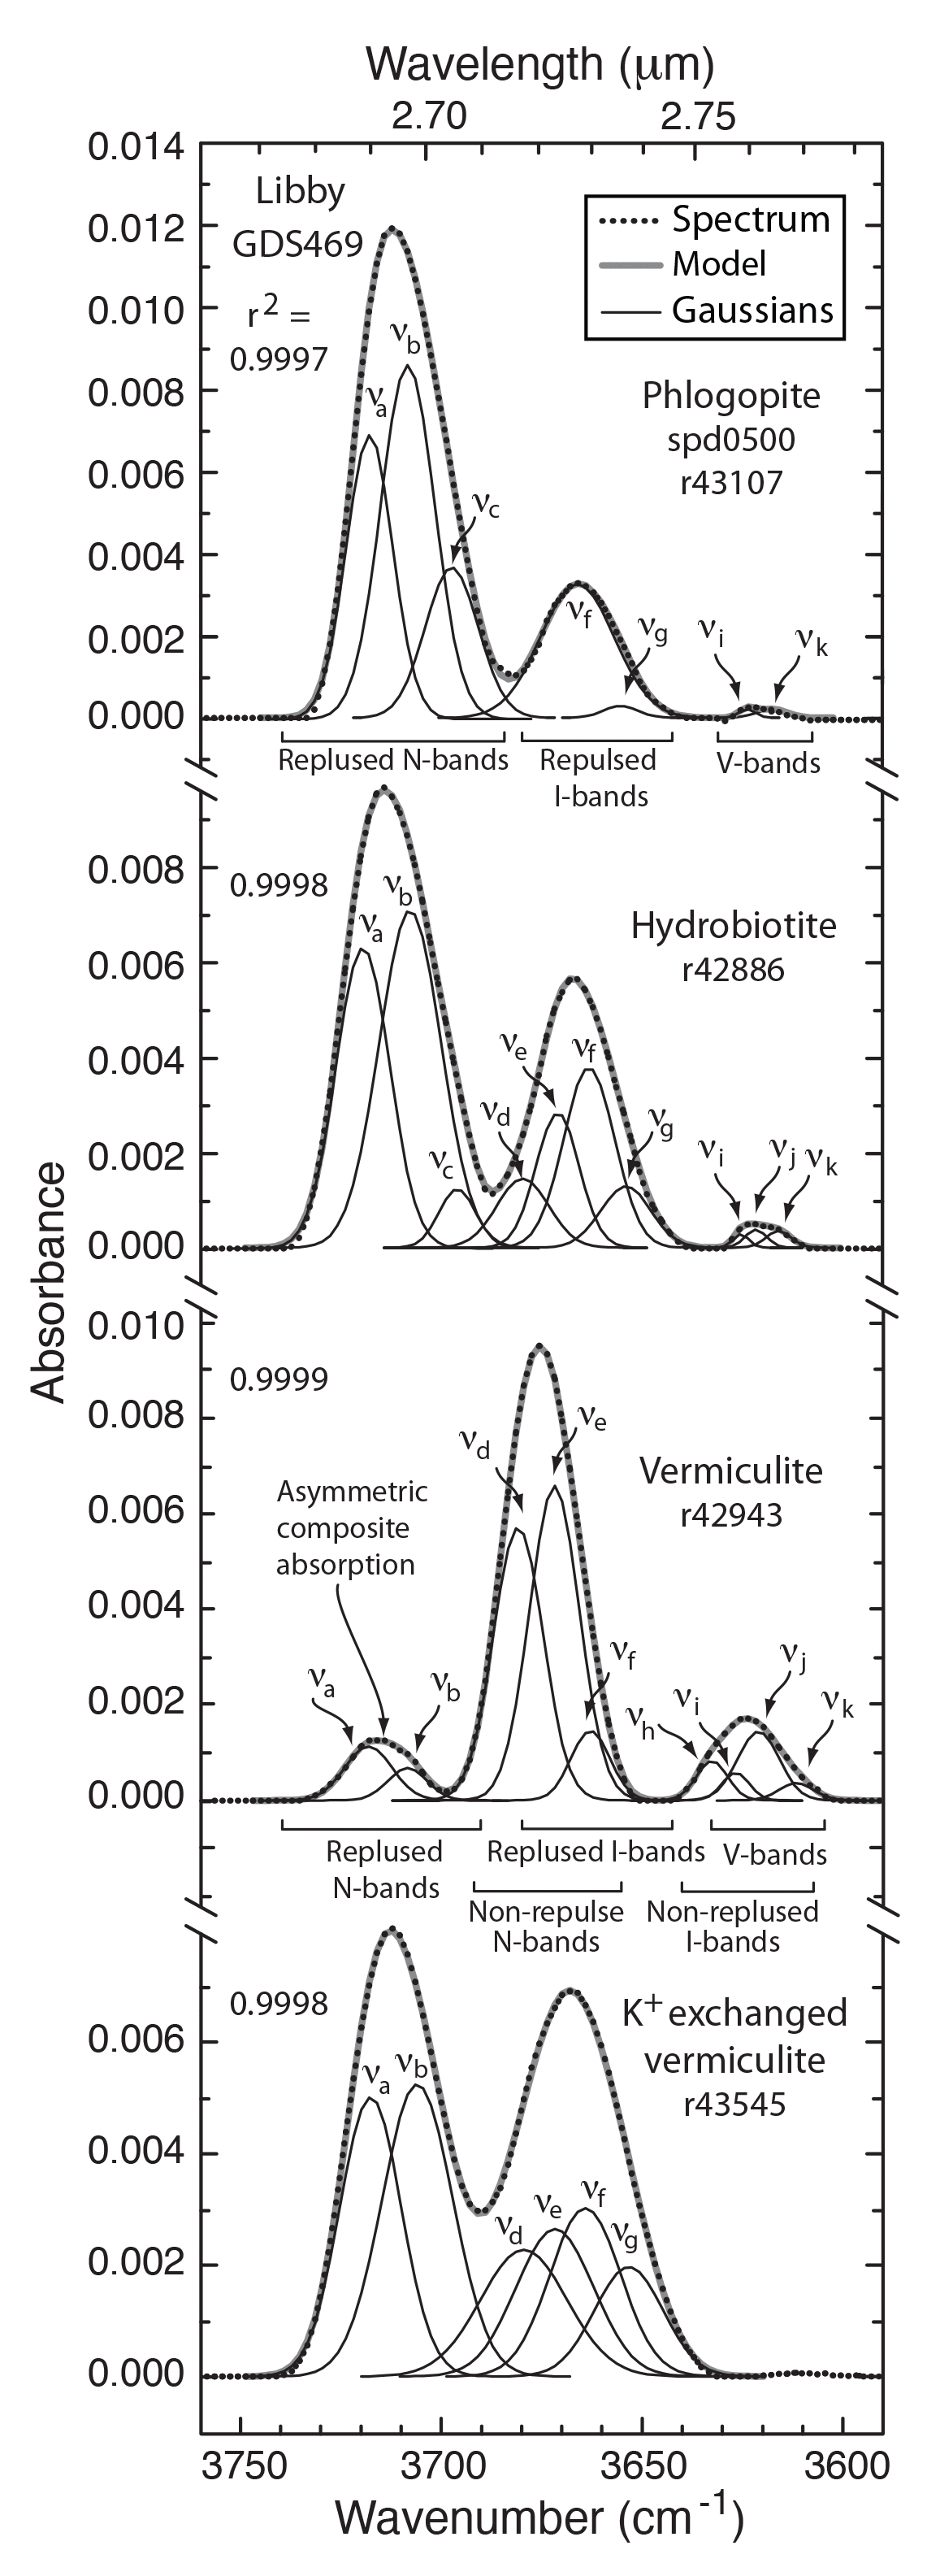 Continuum-removed absorbance spectra of handpicked, ground flakes of phlogopite, hydrobiotite, and vermiculite.